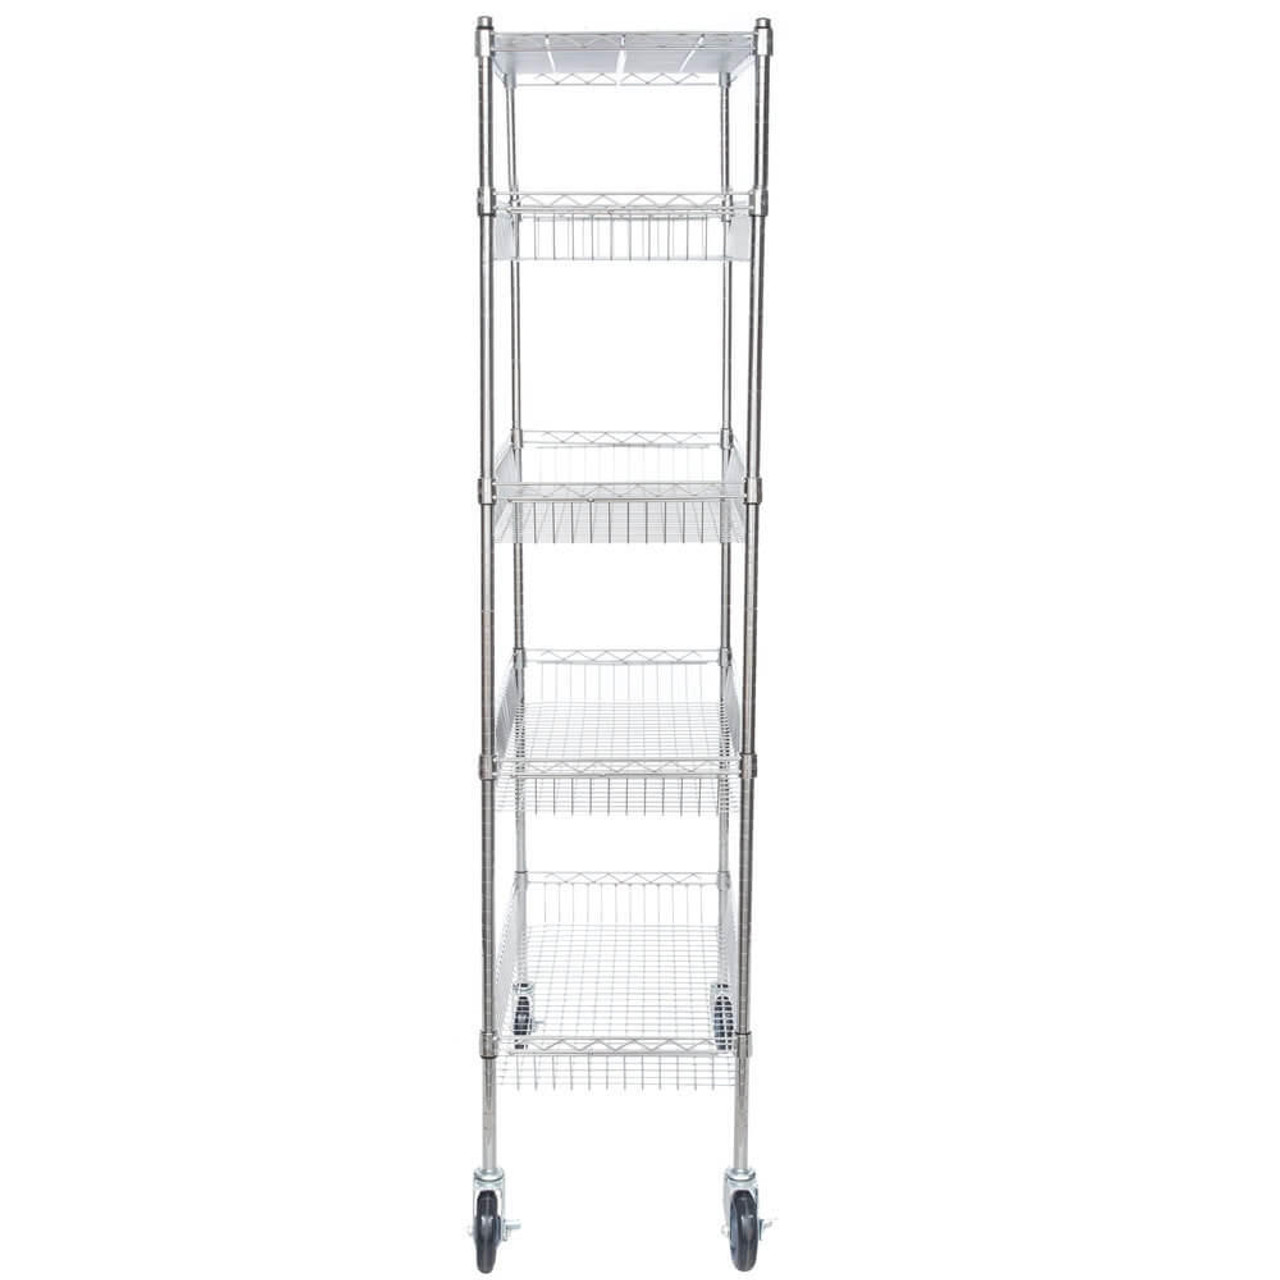 Chicken Pieces CP NSF Chrome 4 Basket and 1 Wire Shelf Kit - 18" x 36" x 70" | Versatile and Durable Storage Solution 